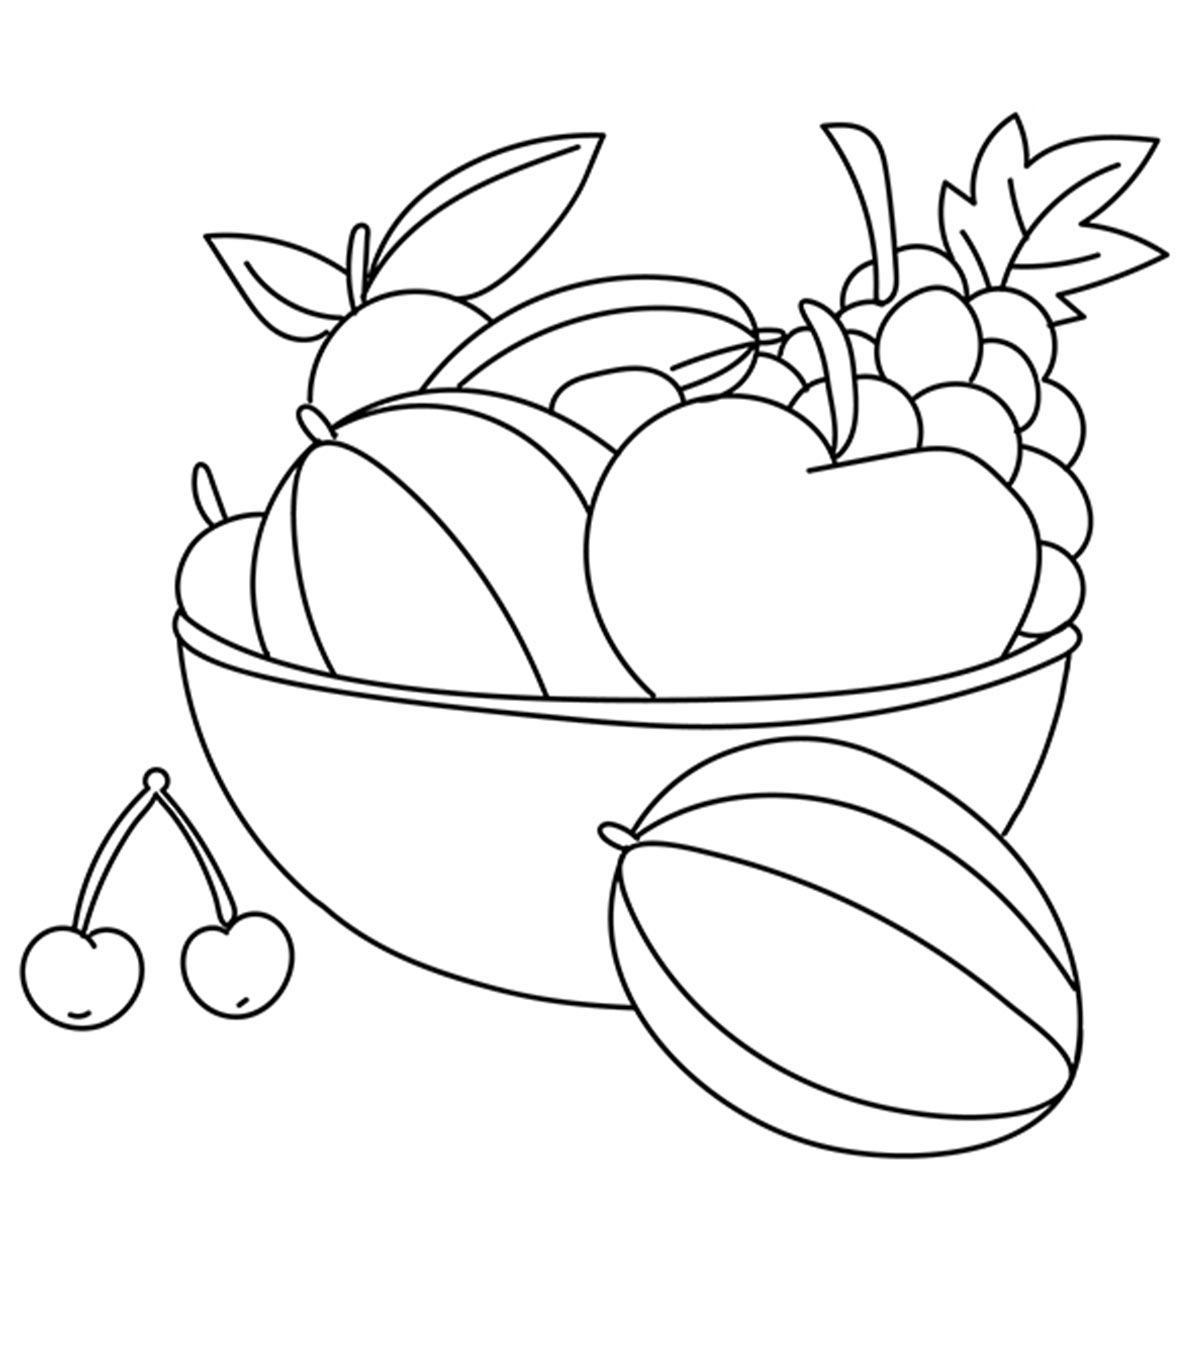 Top 10 Best Cherry Coloring Pages For Your Little Ones